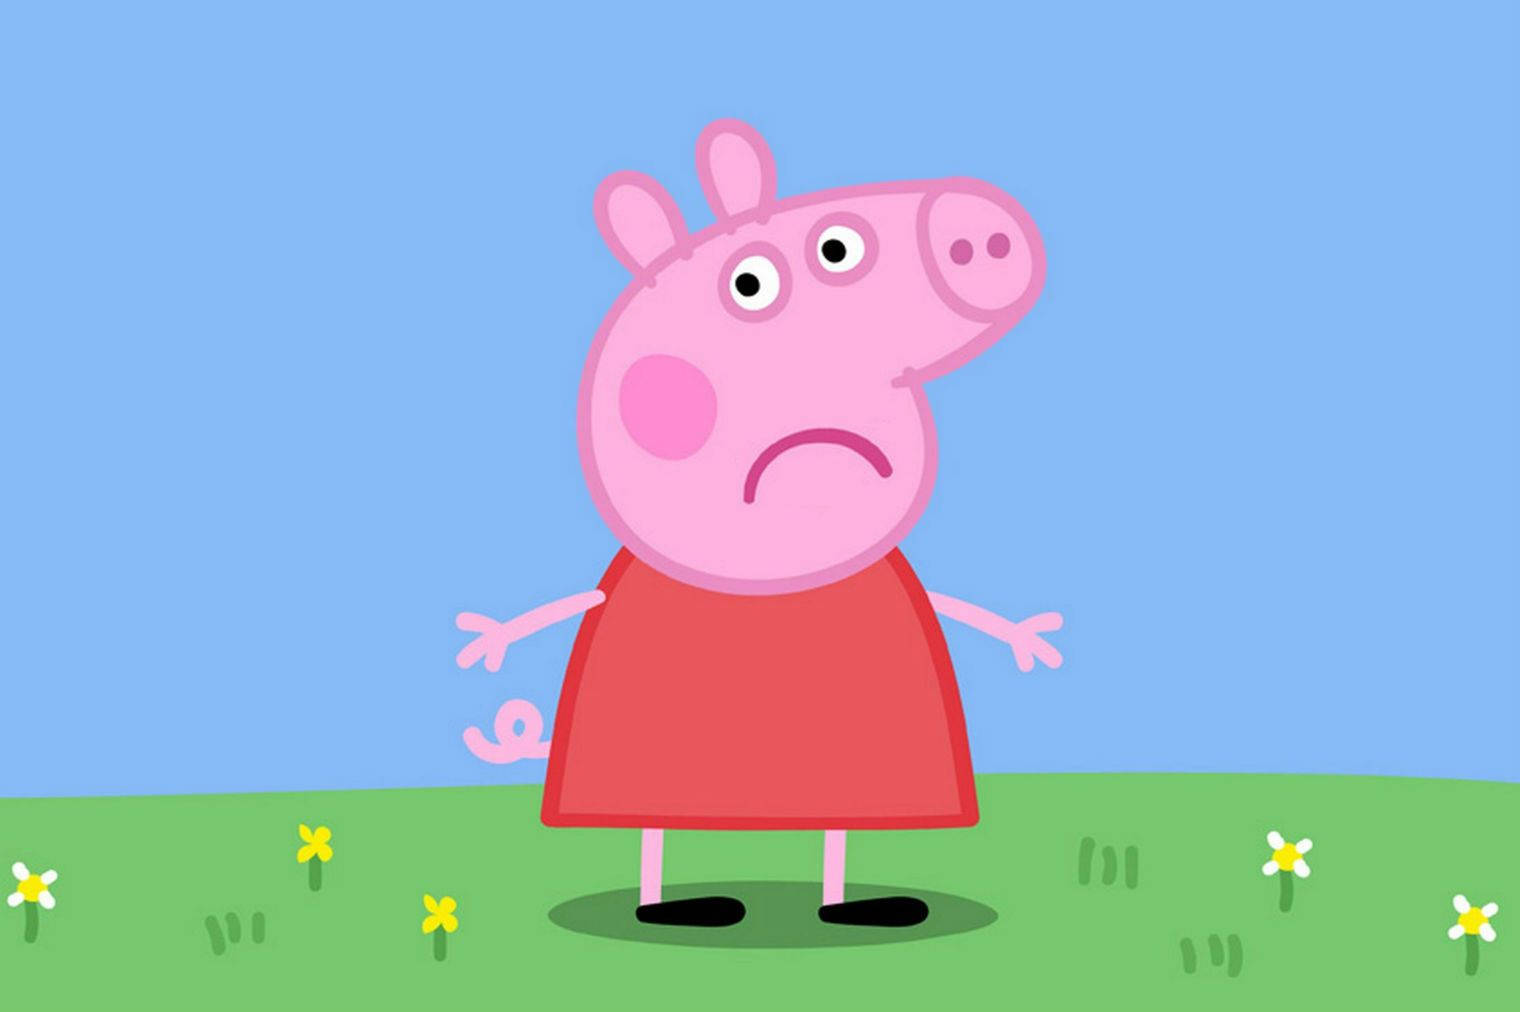 Peppa Pig with a sad face wallpaper.